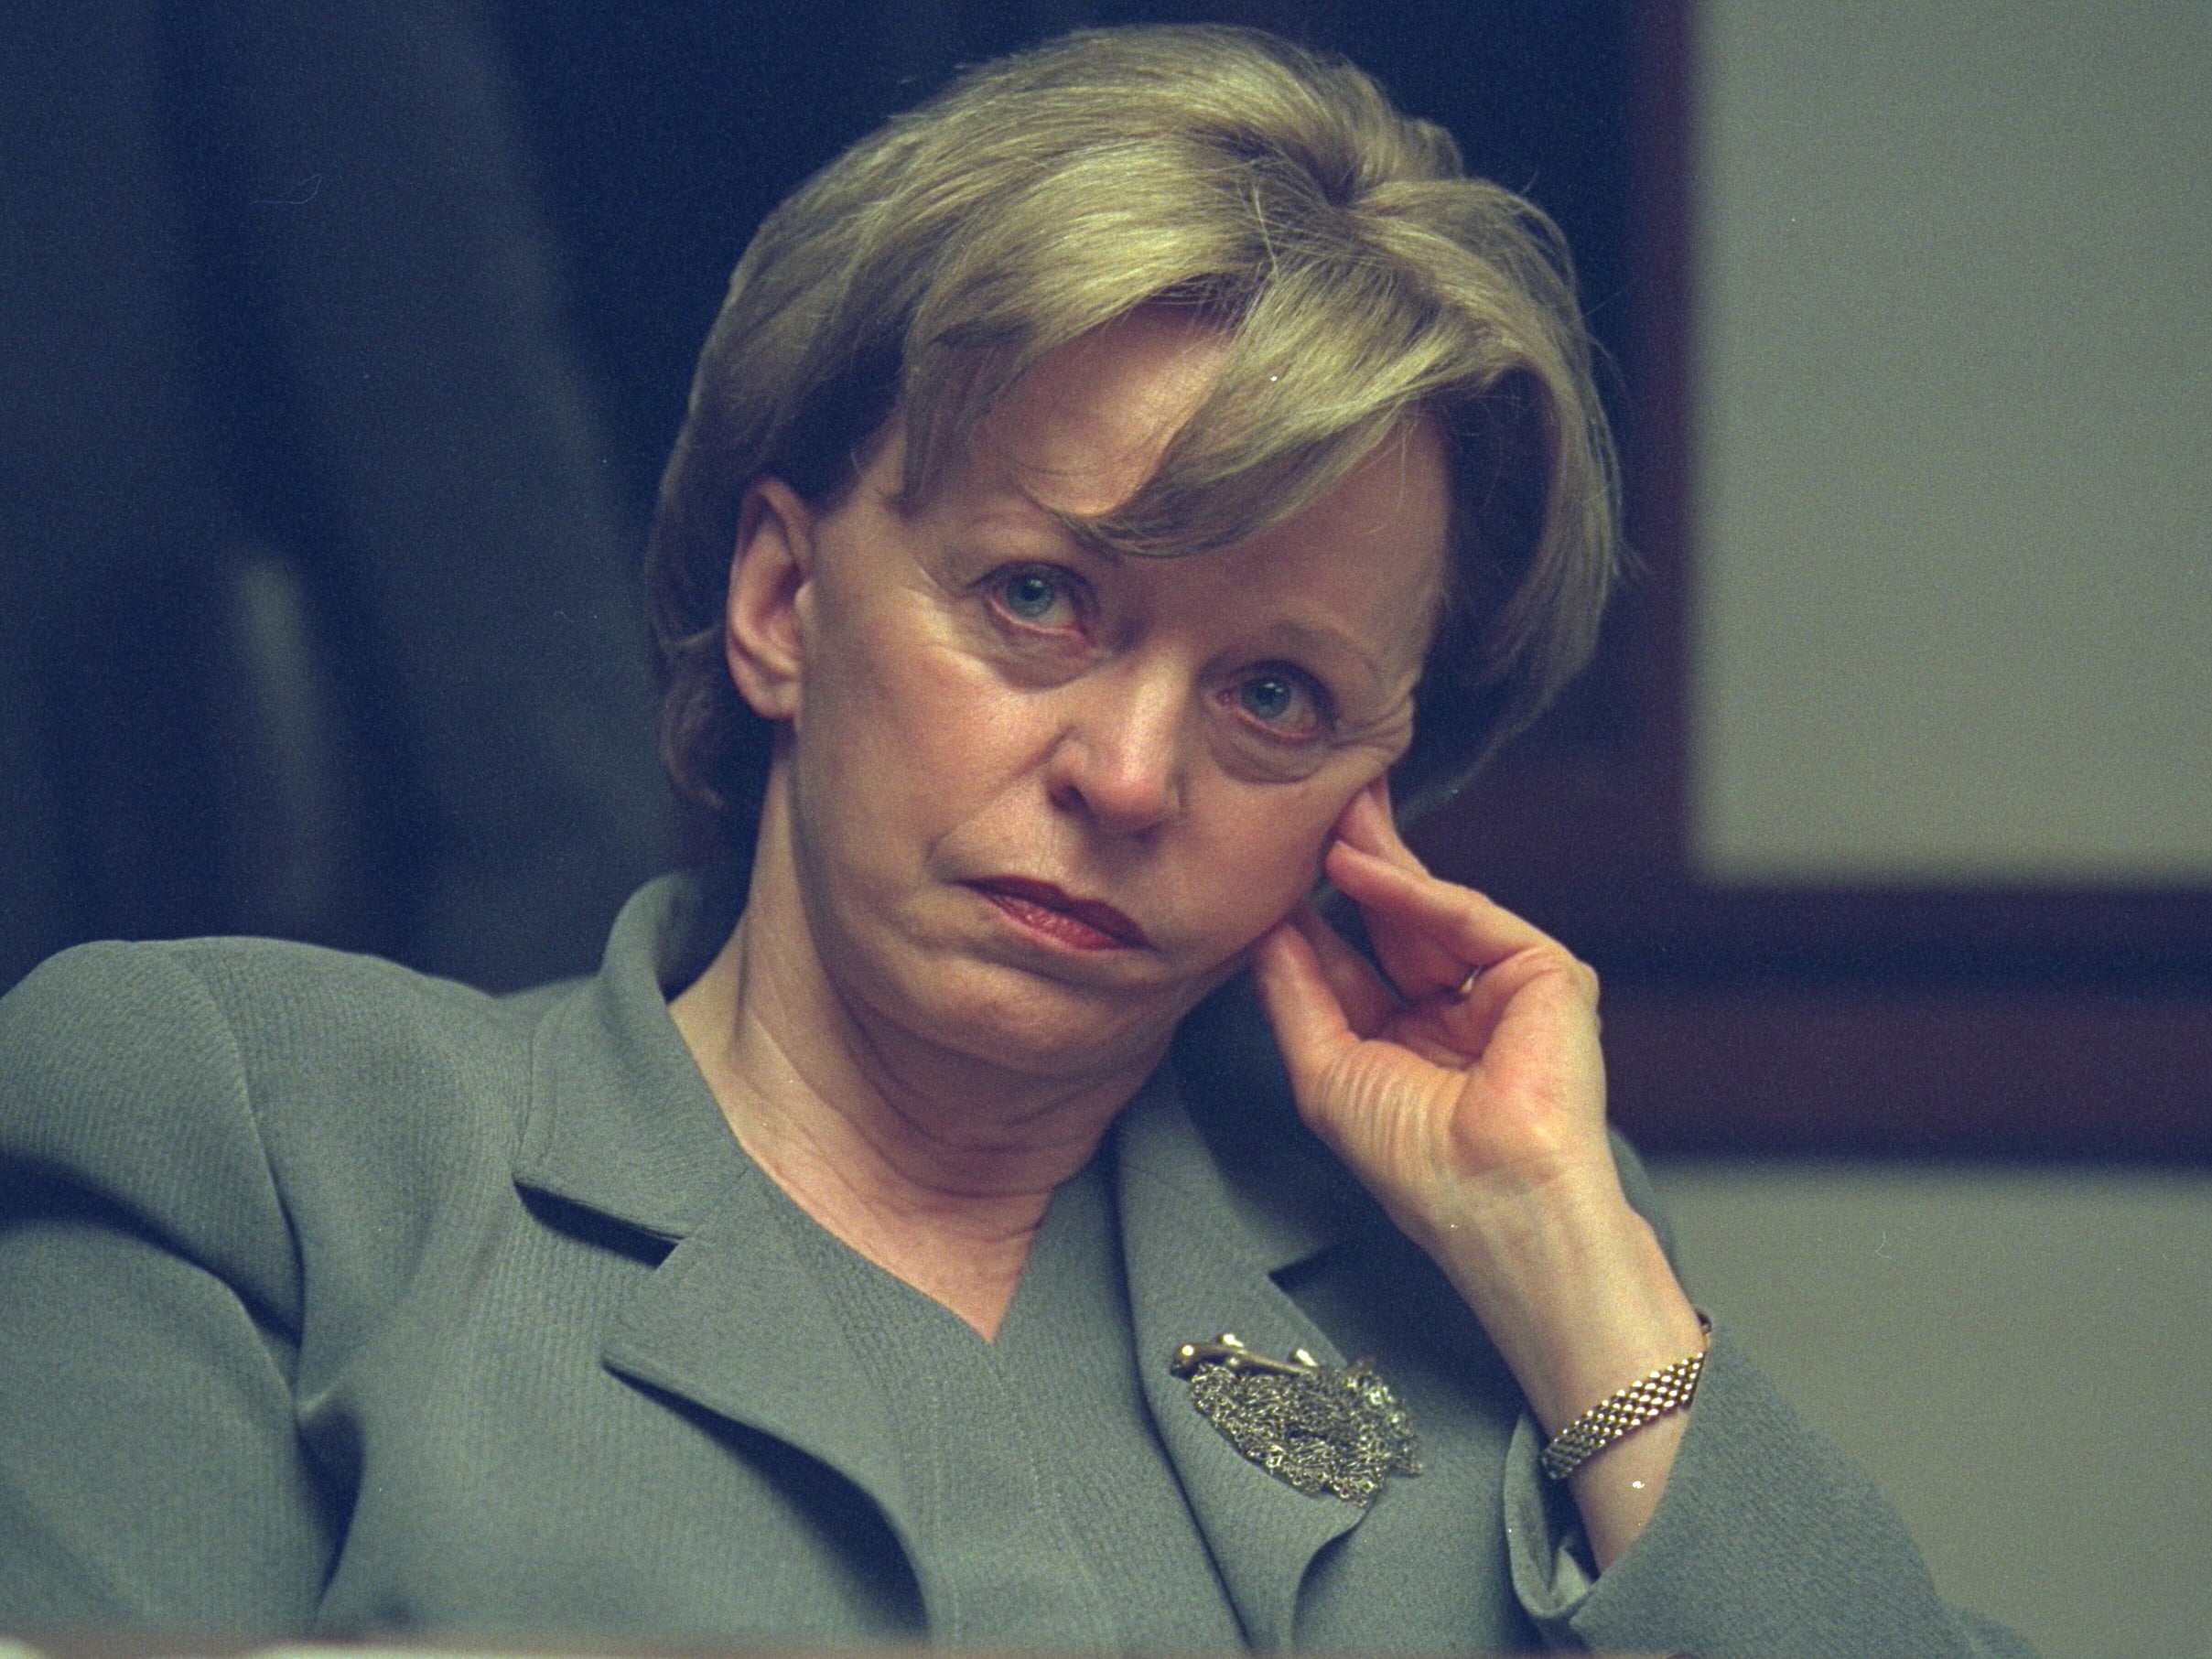 Lynne Cheney was brought to the Emergency Operations Centre for security reasons